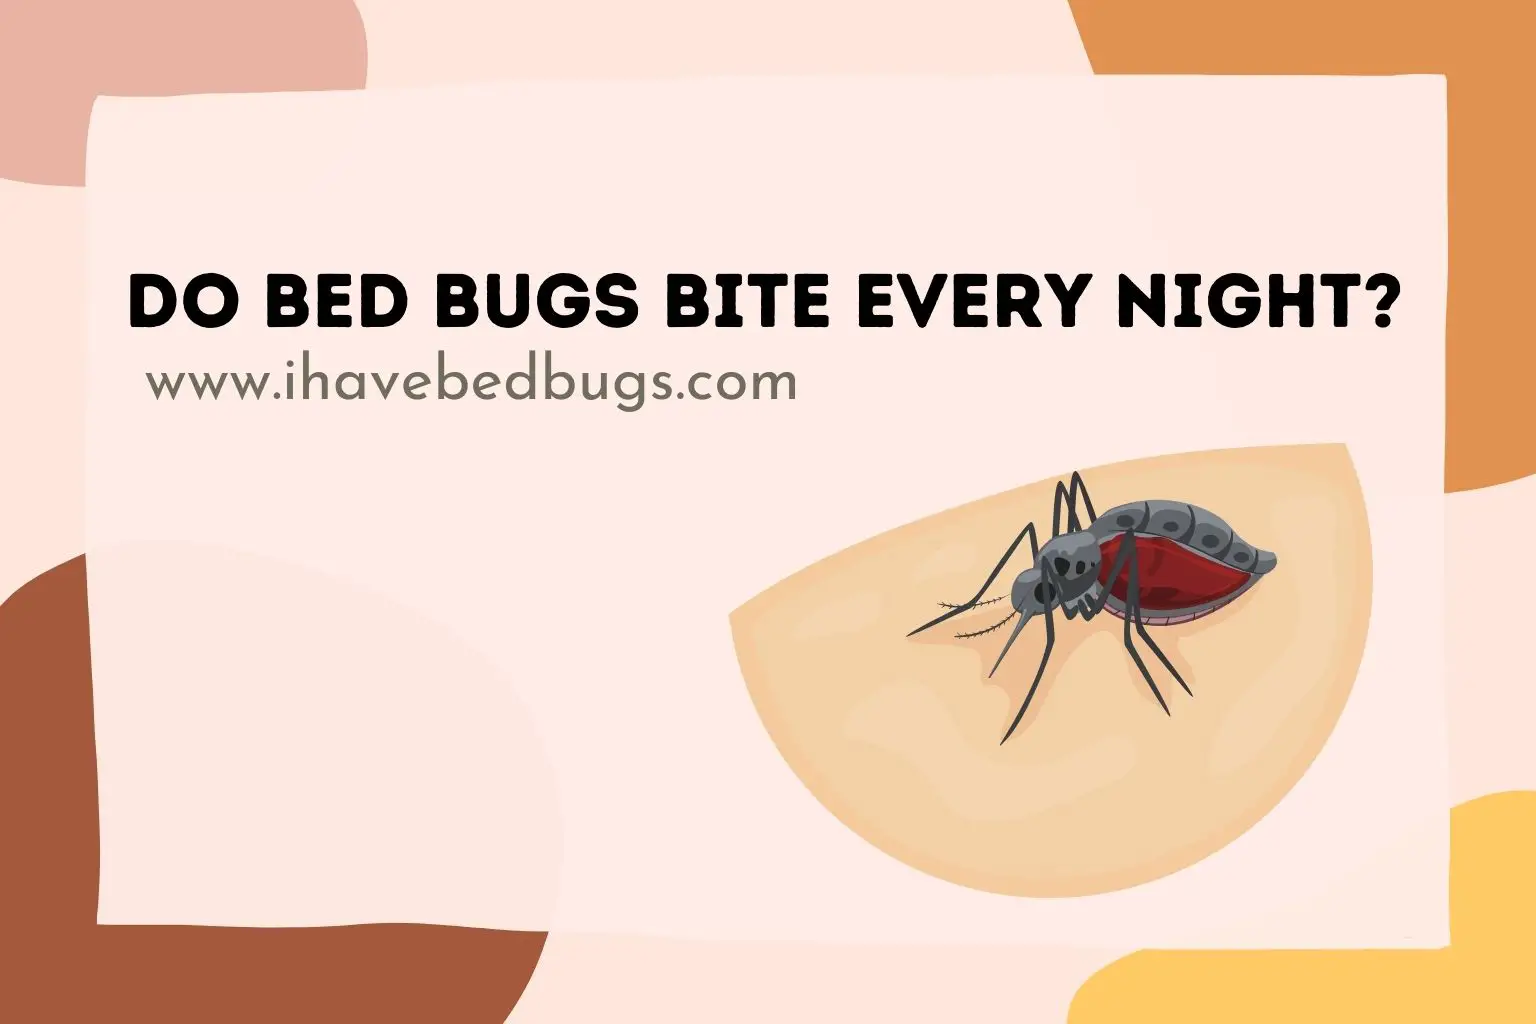 Do bed bugs bite every night